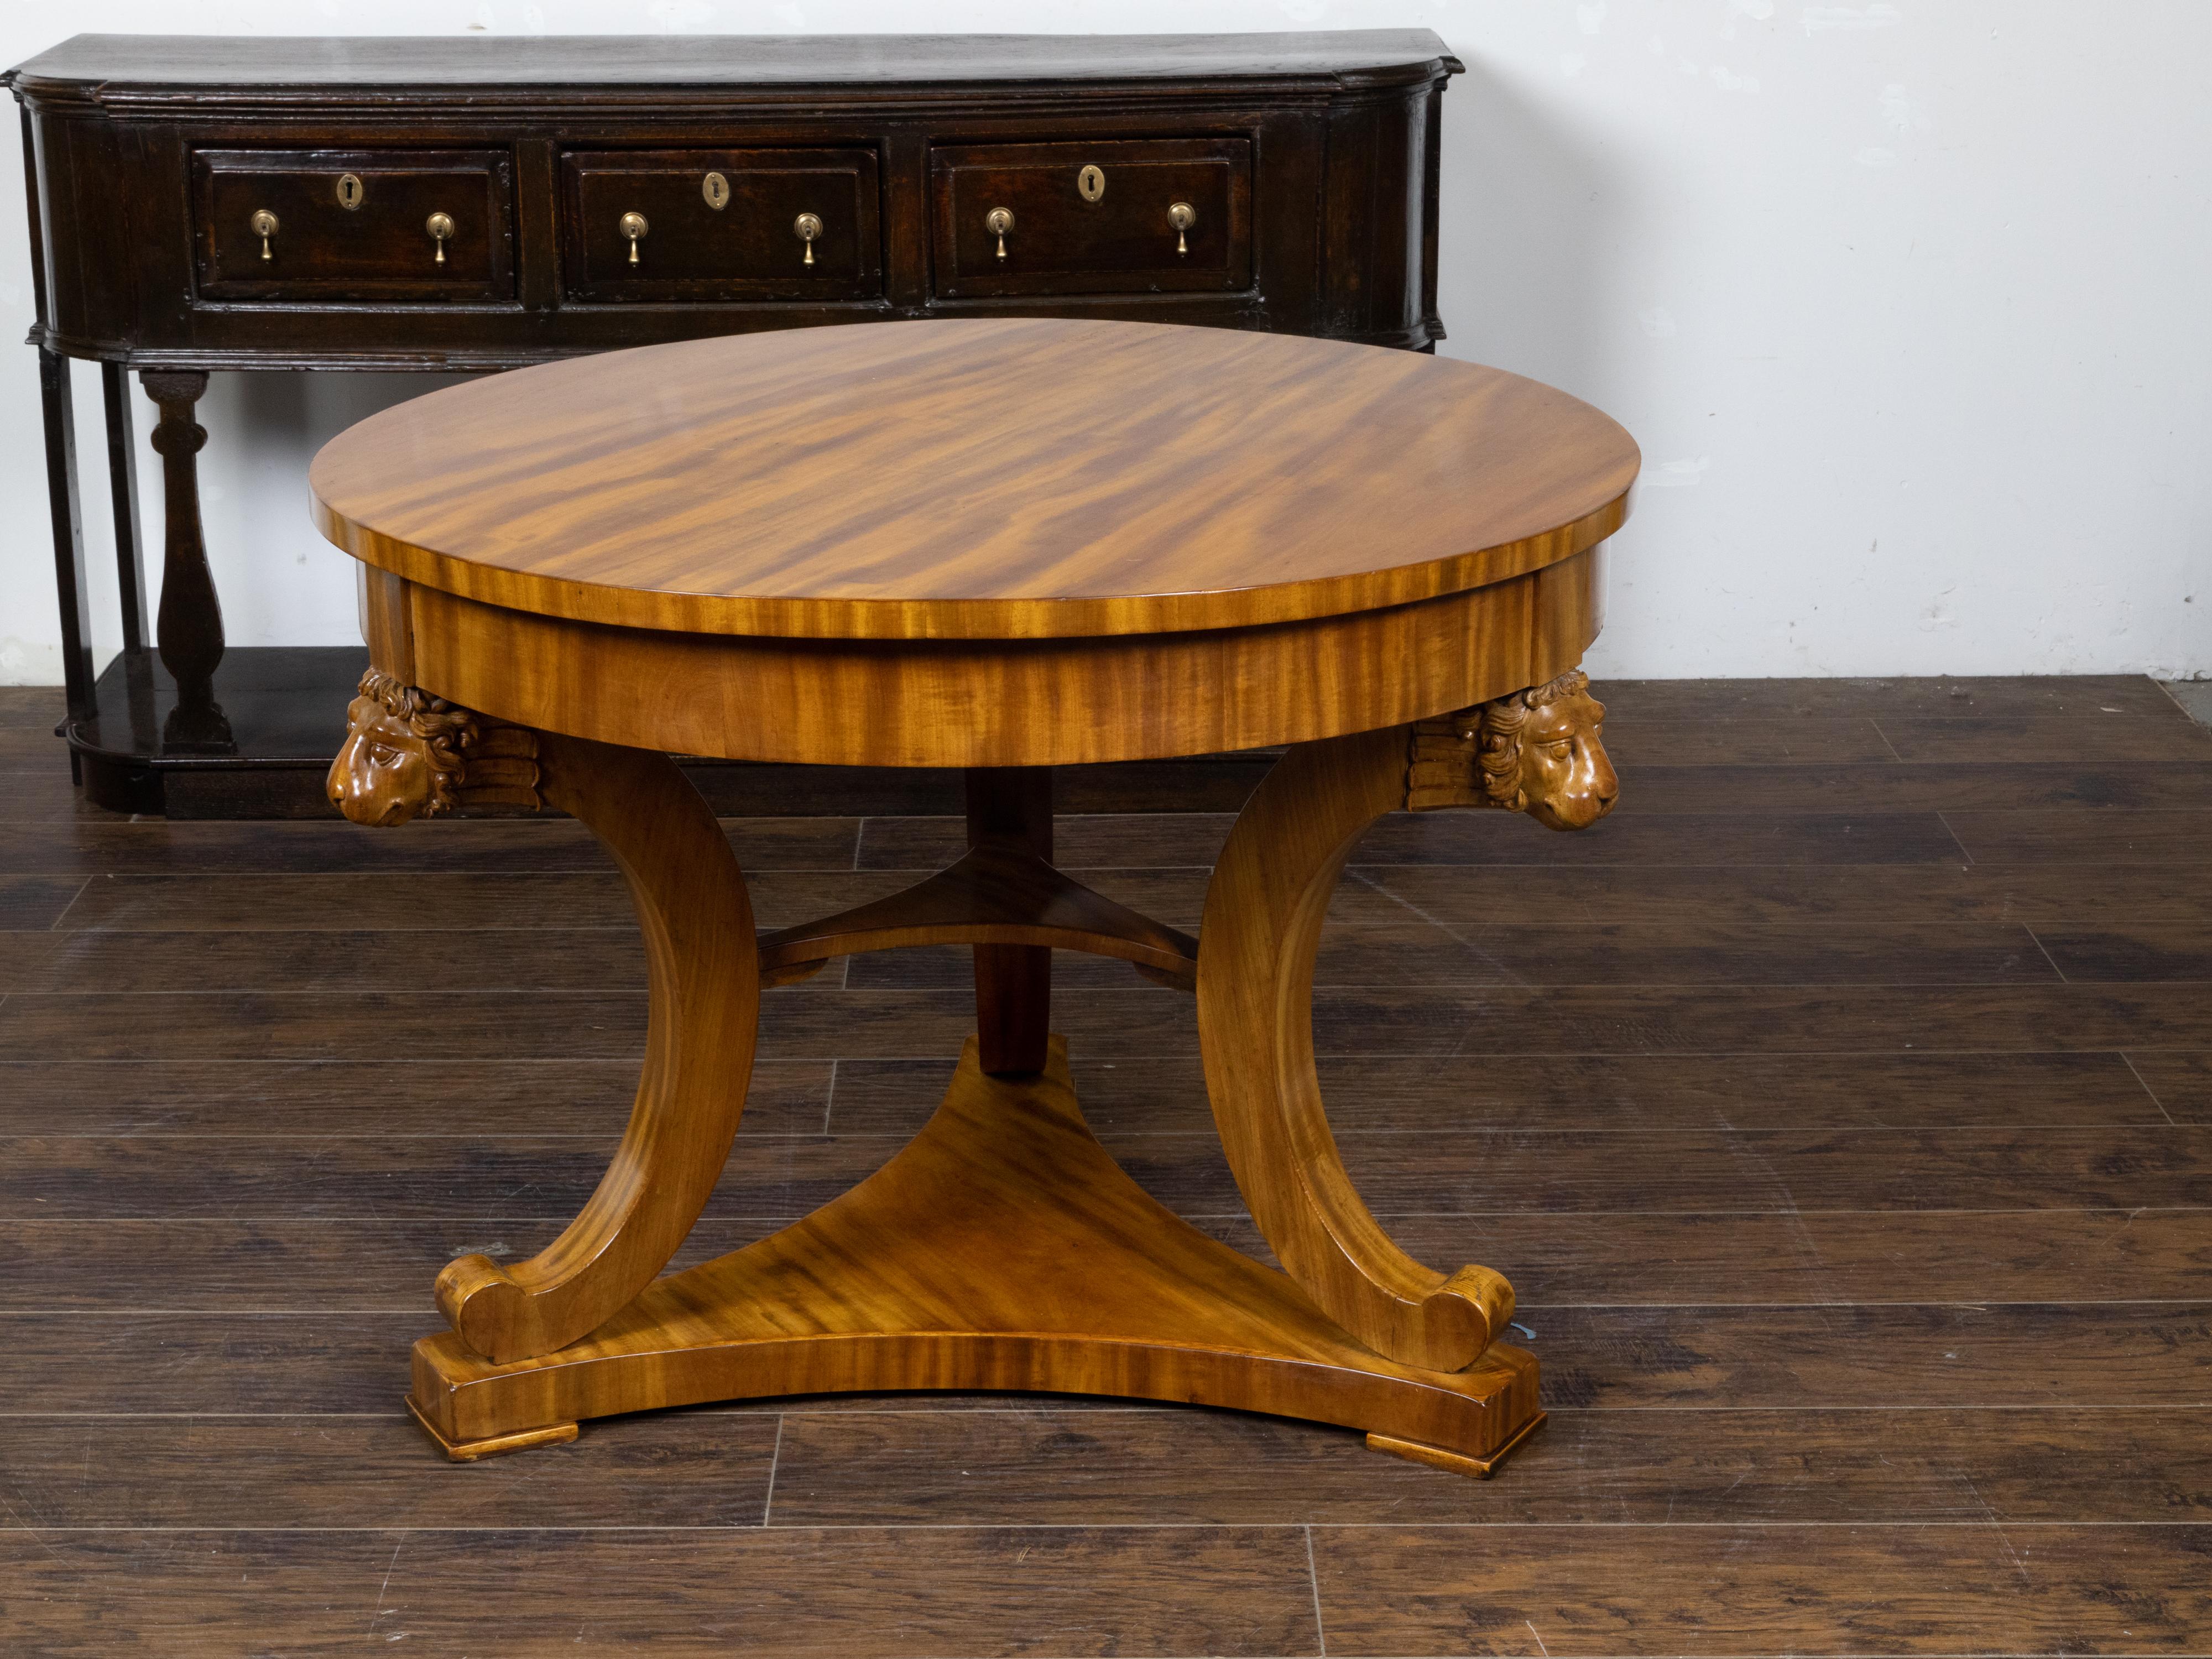 An English Regency period walnut center table from the 19th century, with round top, carved lion heads, tripod base and in-curving shelves. Created in England during the 19th century, this center table showcases the stylistic characteristics of the